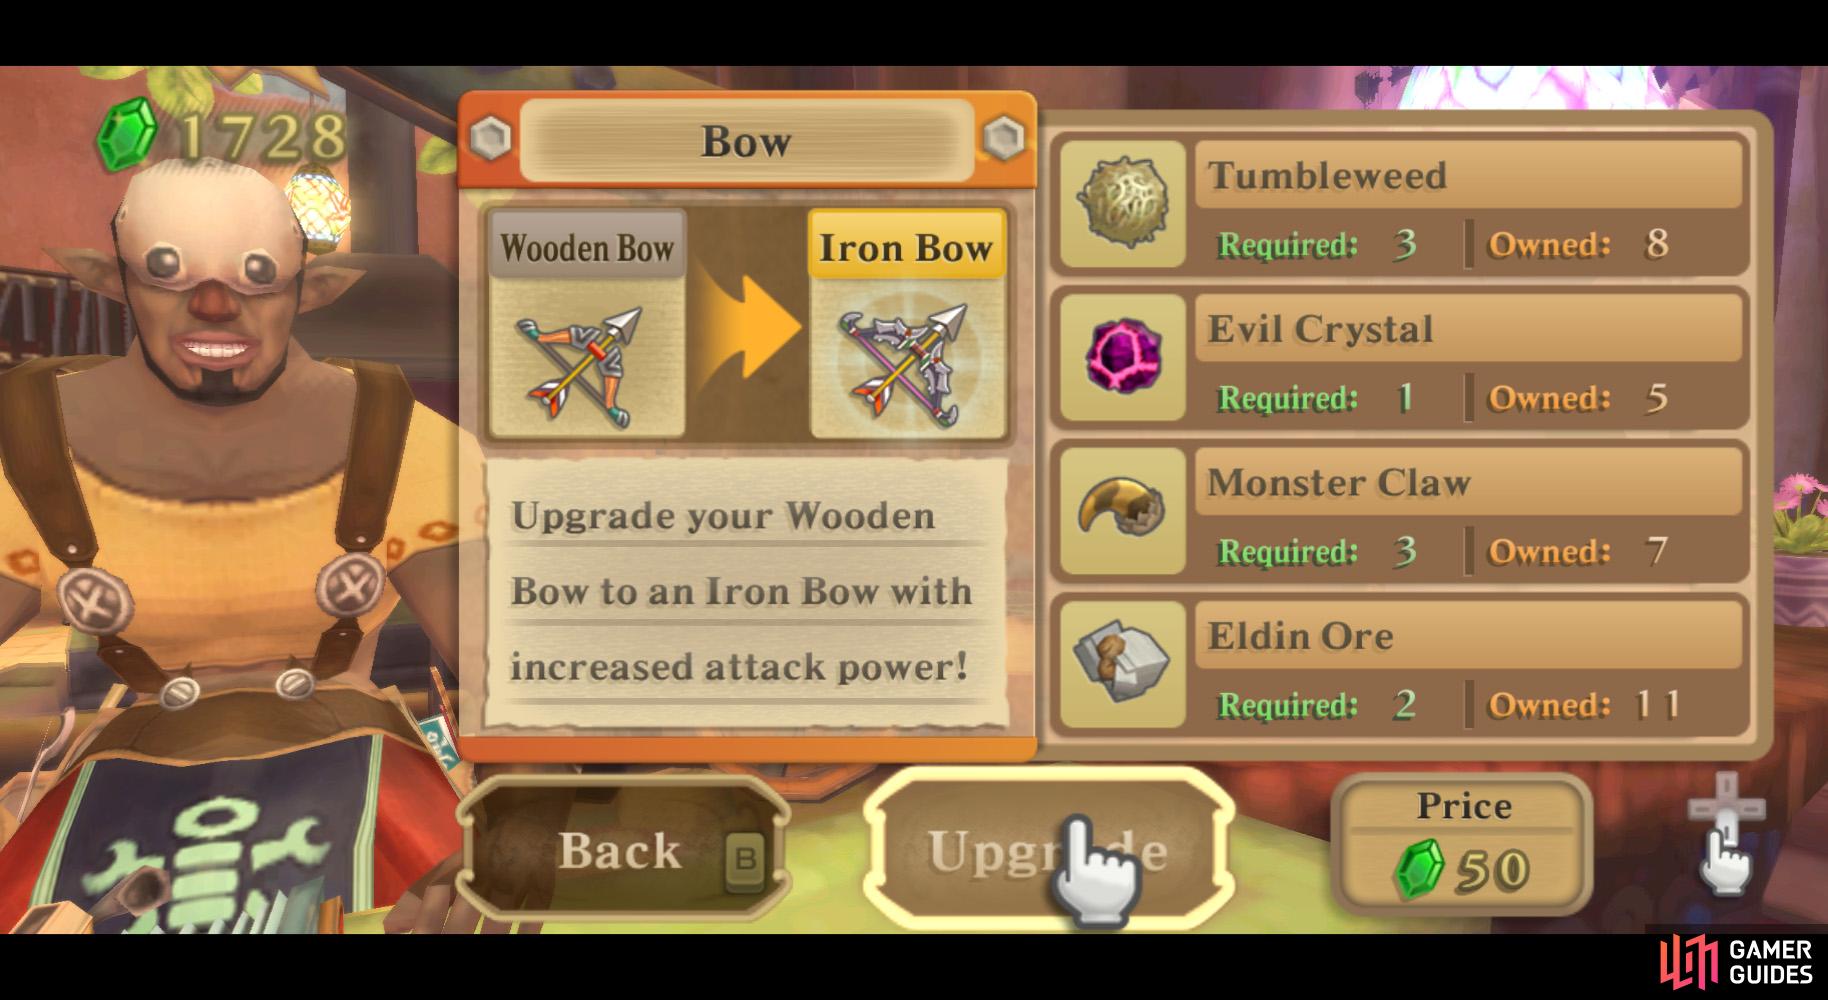 You can get Evil Crystals from chests or rarely from Cursed Bokoblins.